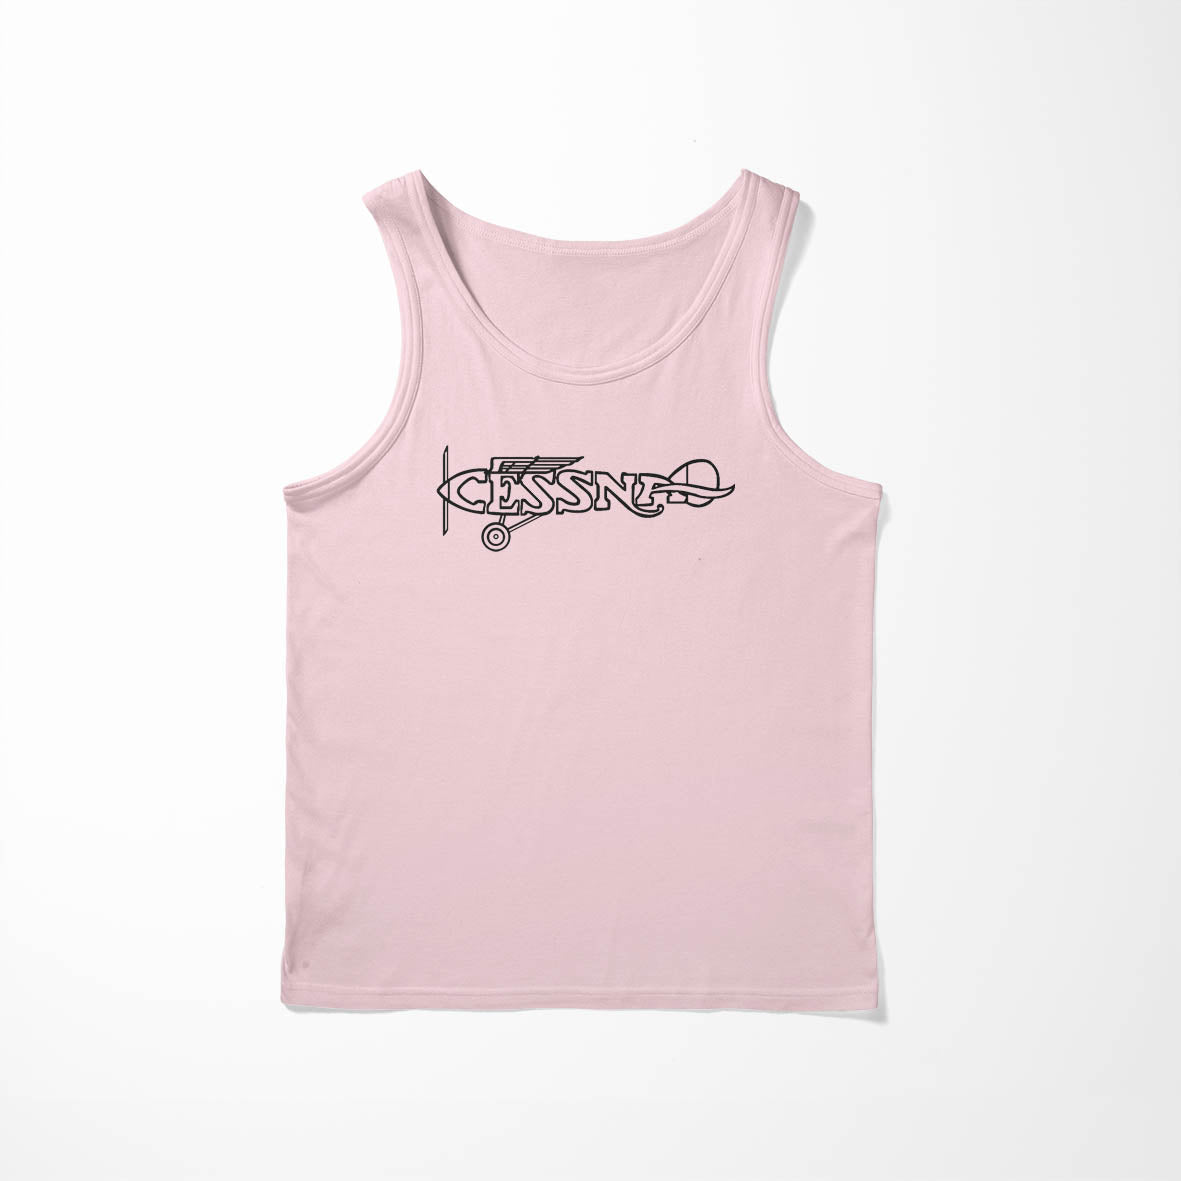 Special Cessna Text Designed Tank Tops